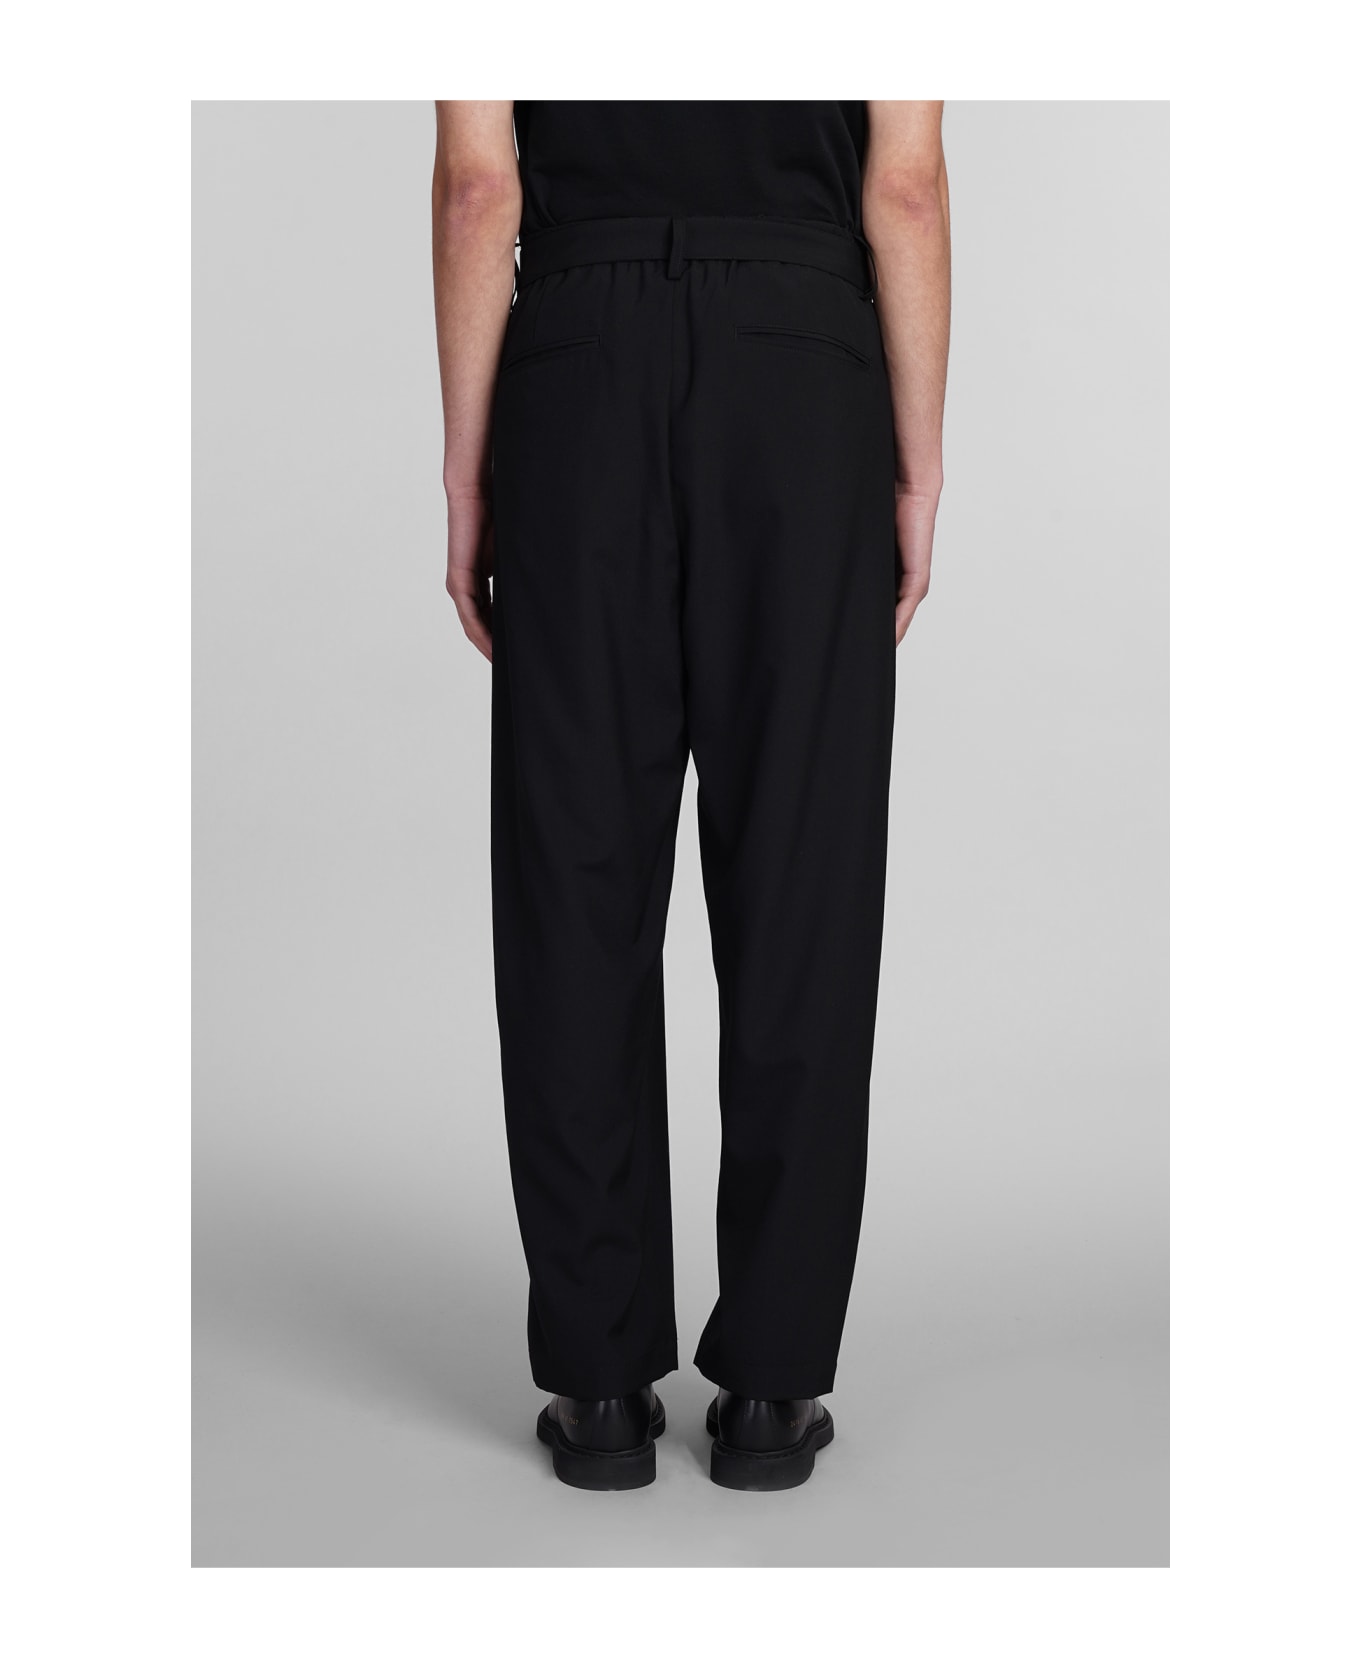 Attachment Pants In Black Wool - black